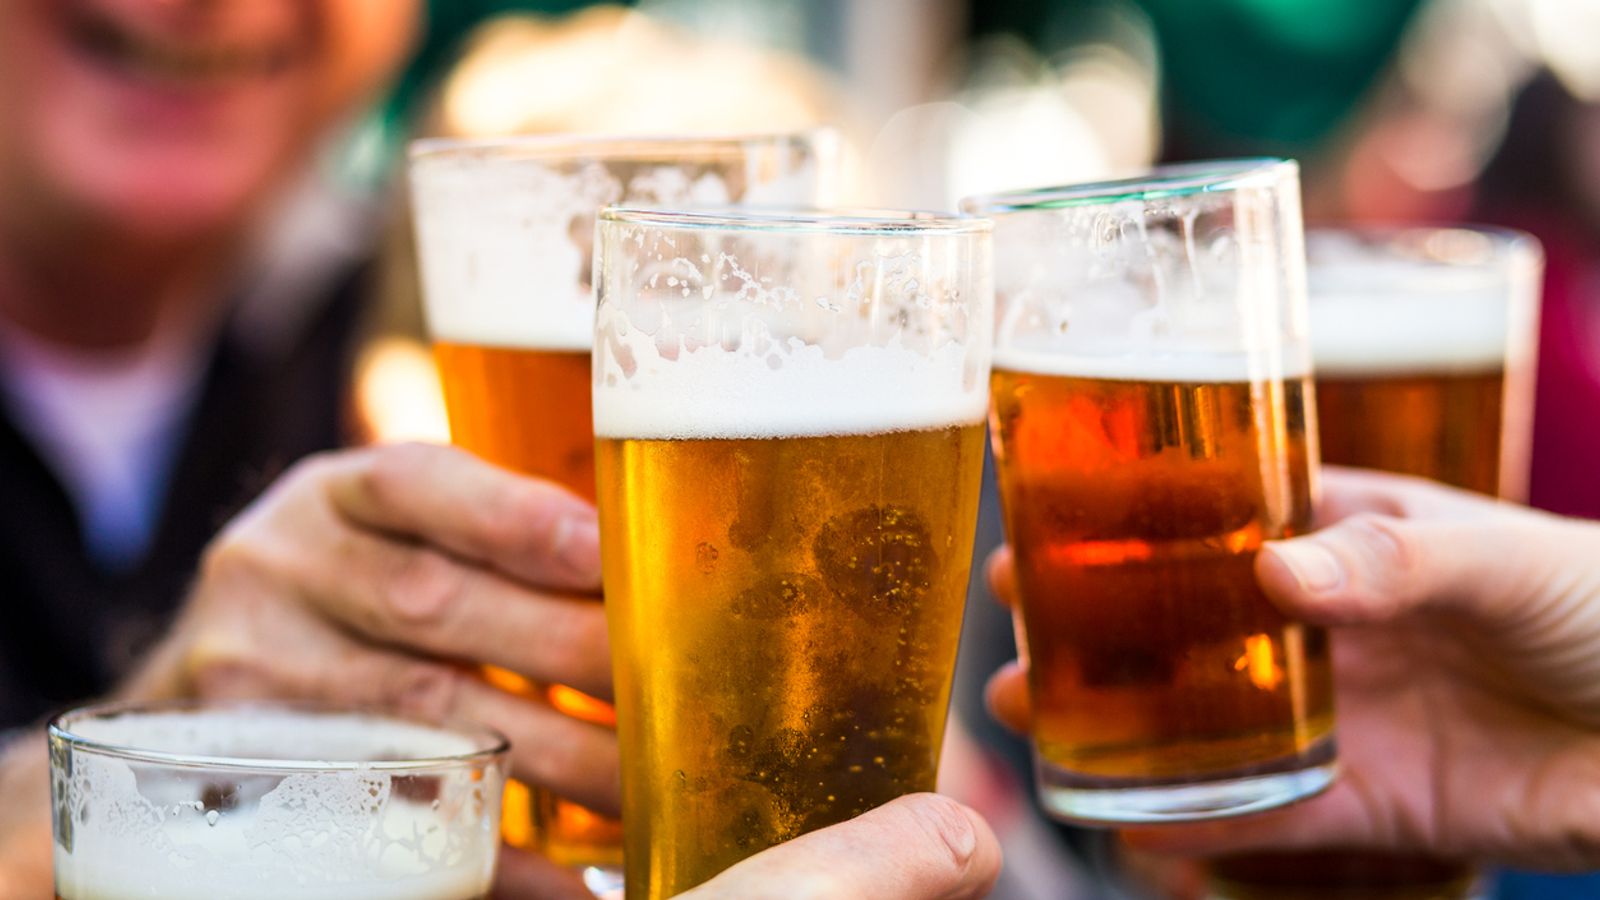 Nearly 90% of beer served in UK pubs and and bars is short-measured - Trading Standards finds